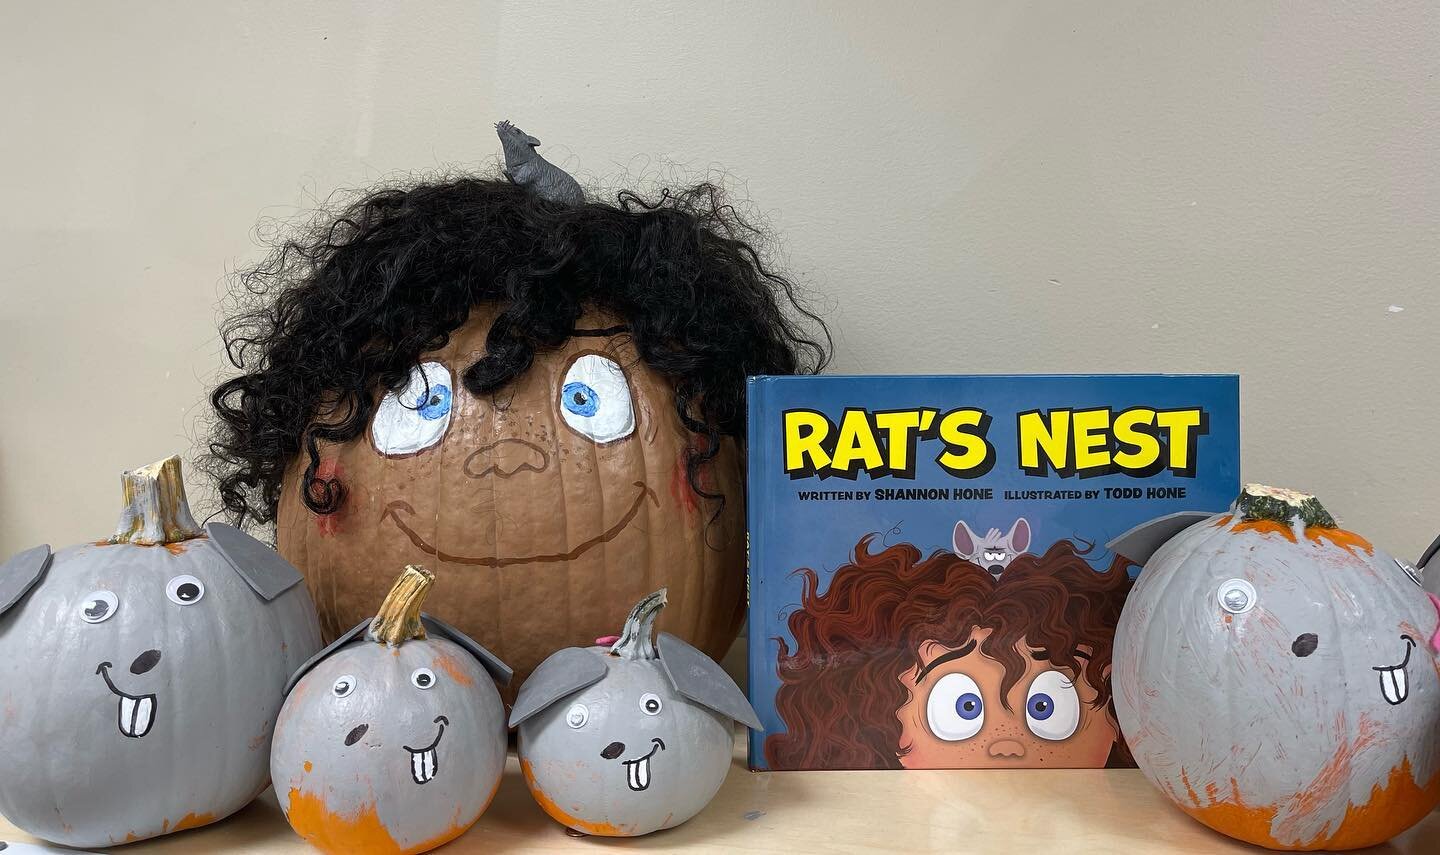 Special shout out to the Goddard School Raleigh Ridge Europe classroom who chose Rat&rsquo;s Nest for their picture book pumpkin contest! Guess we know who I&rsquo;m voting for 🙂 Nice work everyone!

#goddardschool #preschool #preschoolactivities #p